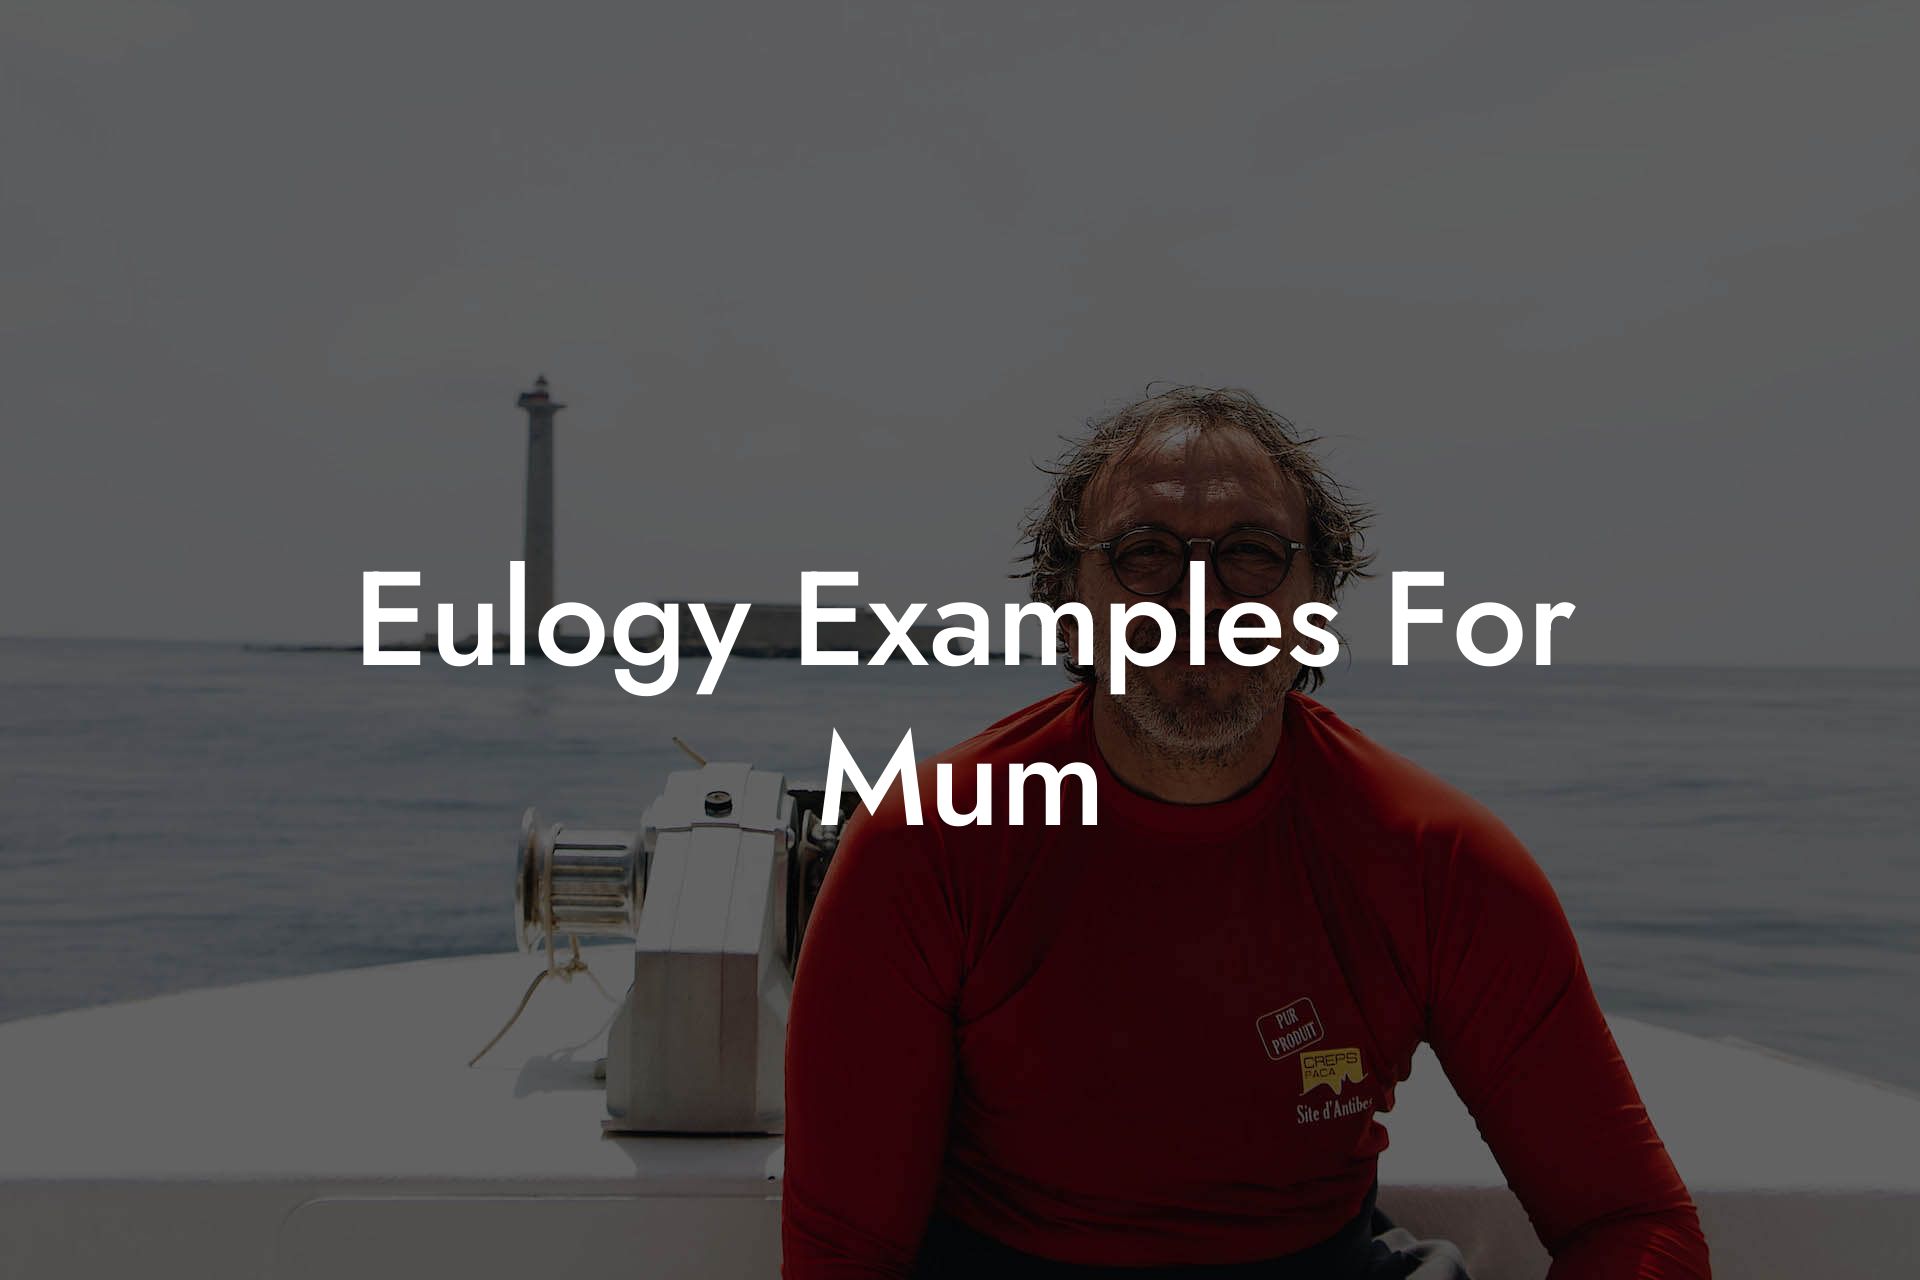 Eulogy Examples For Mum